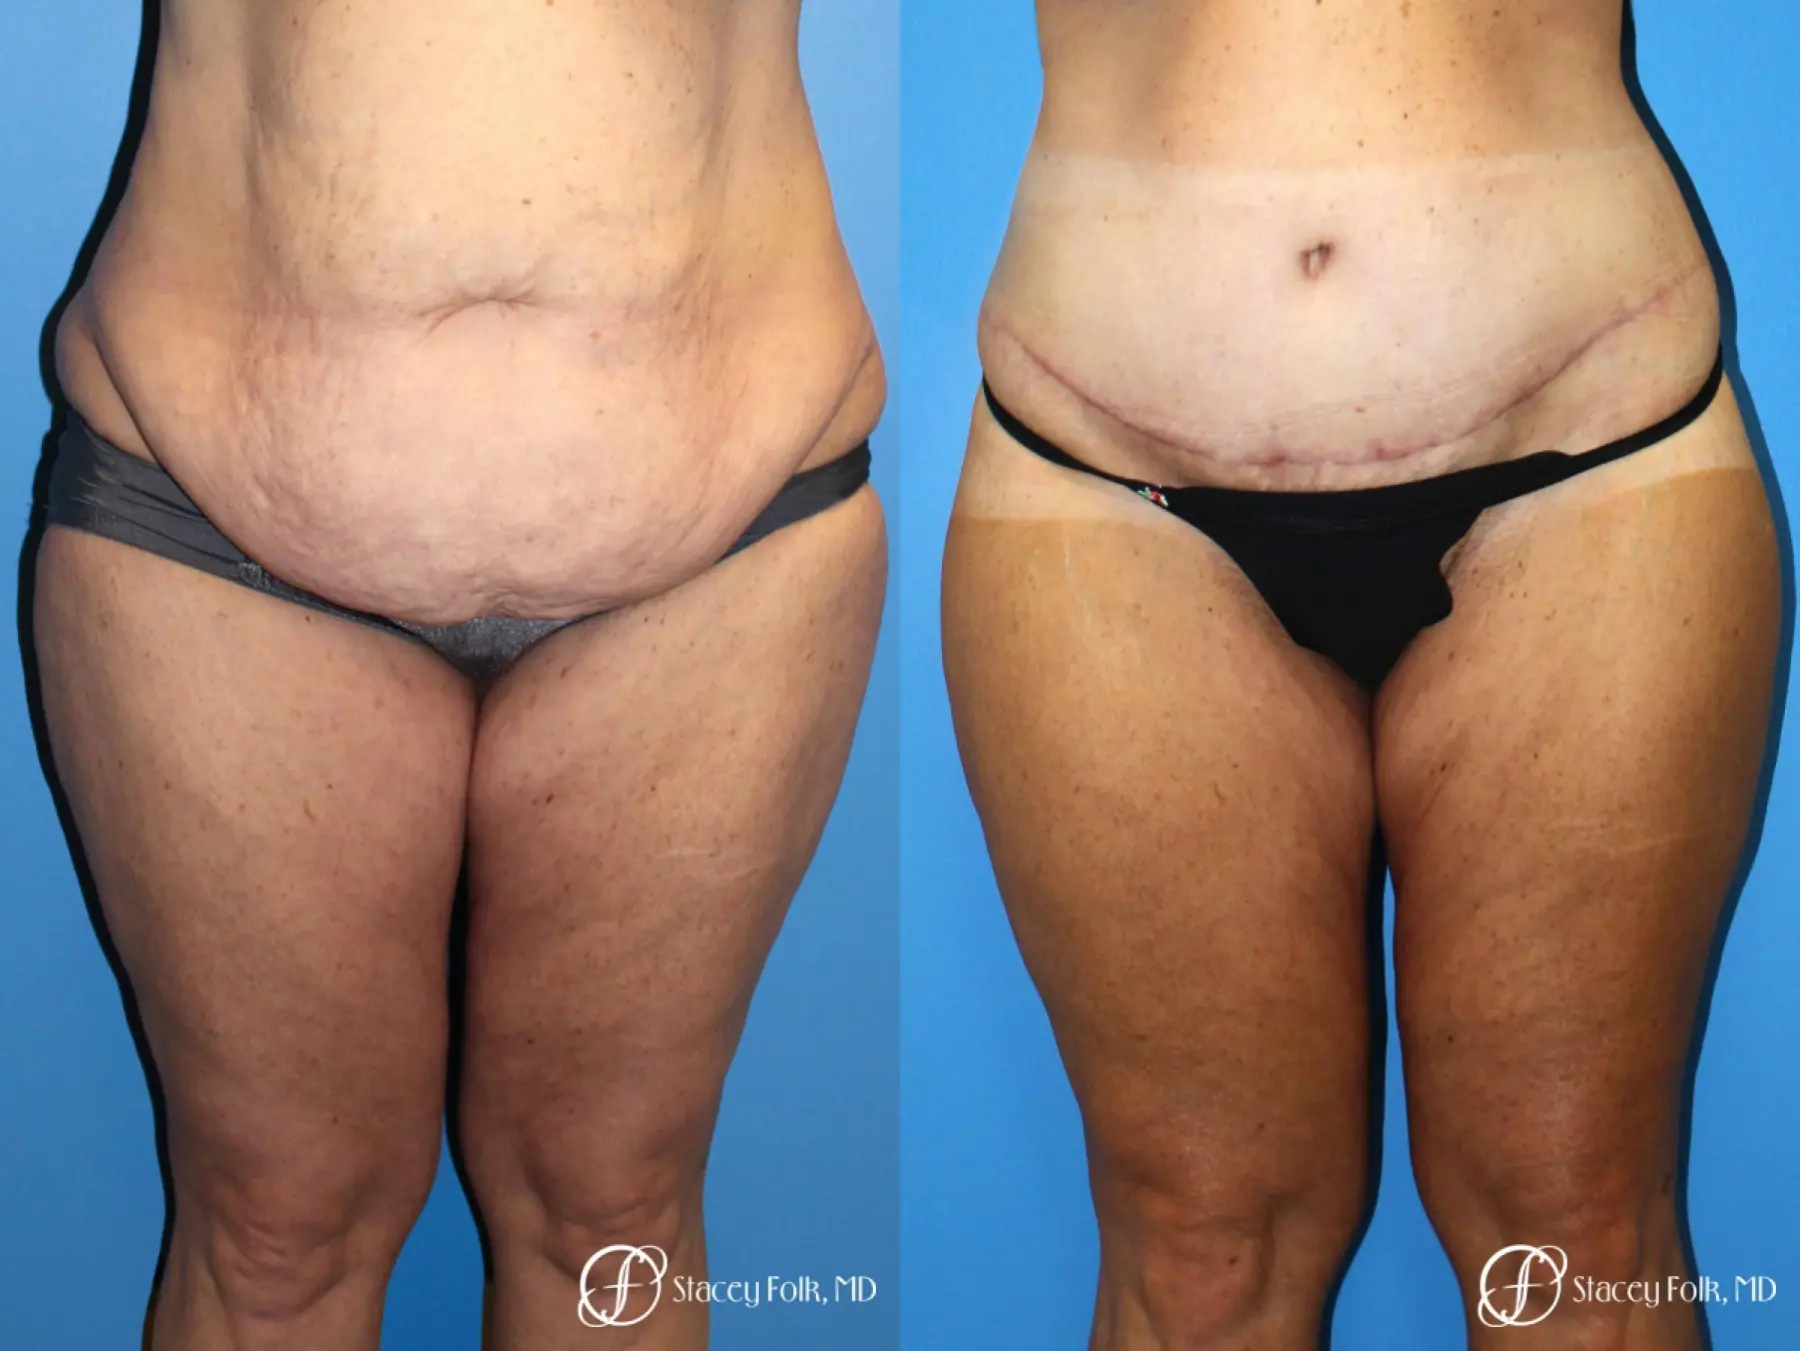 Denver Body Lift belt lipectomy, liposuction, mastopexy 5935 - Before and After 1